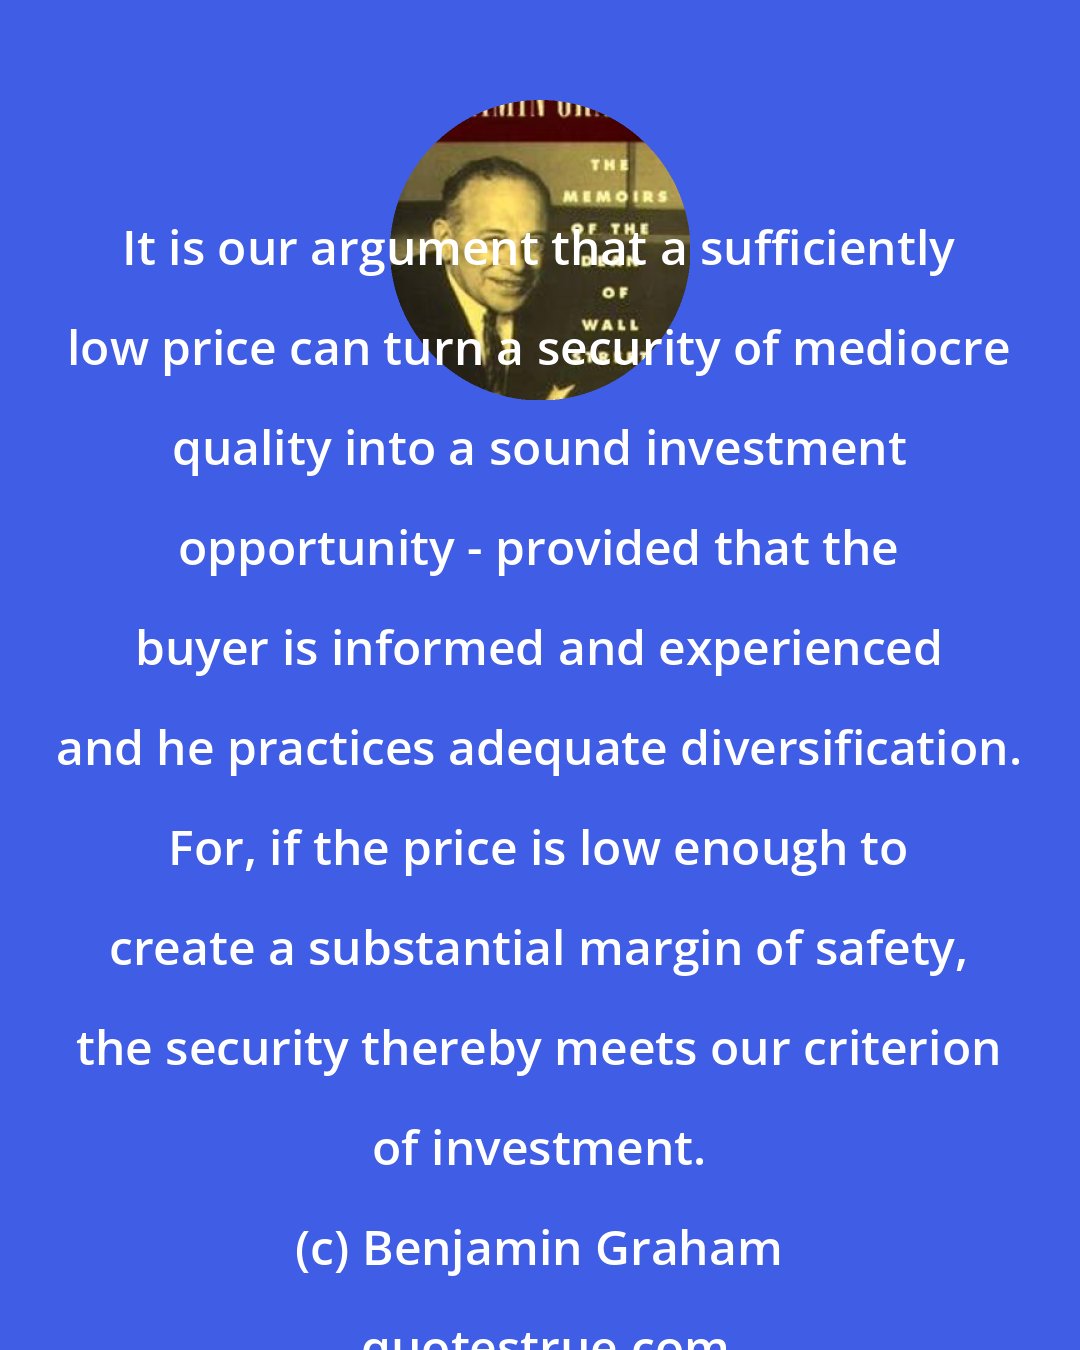 Benjamin Graham: It is our argument that a sufficiently low price can turn a security of mediocre quality into a sound investment opportunity - provided that the buyer is informed and experienced and he practices adequate diversification. For, if the price is low enough to create a substantial margin of safety, the security thereby meets our criterion of investment.